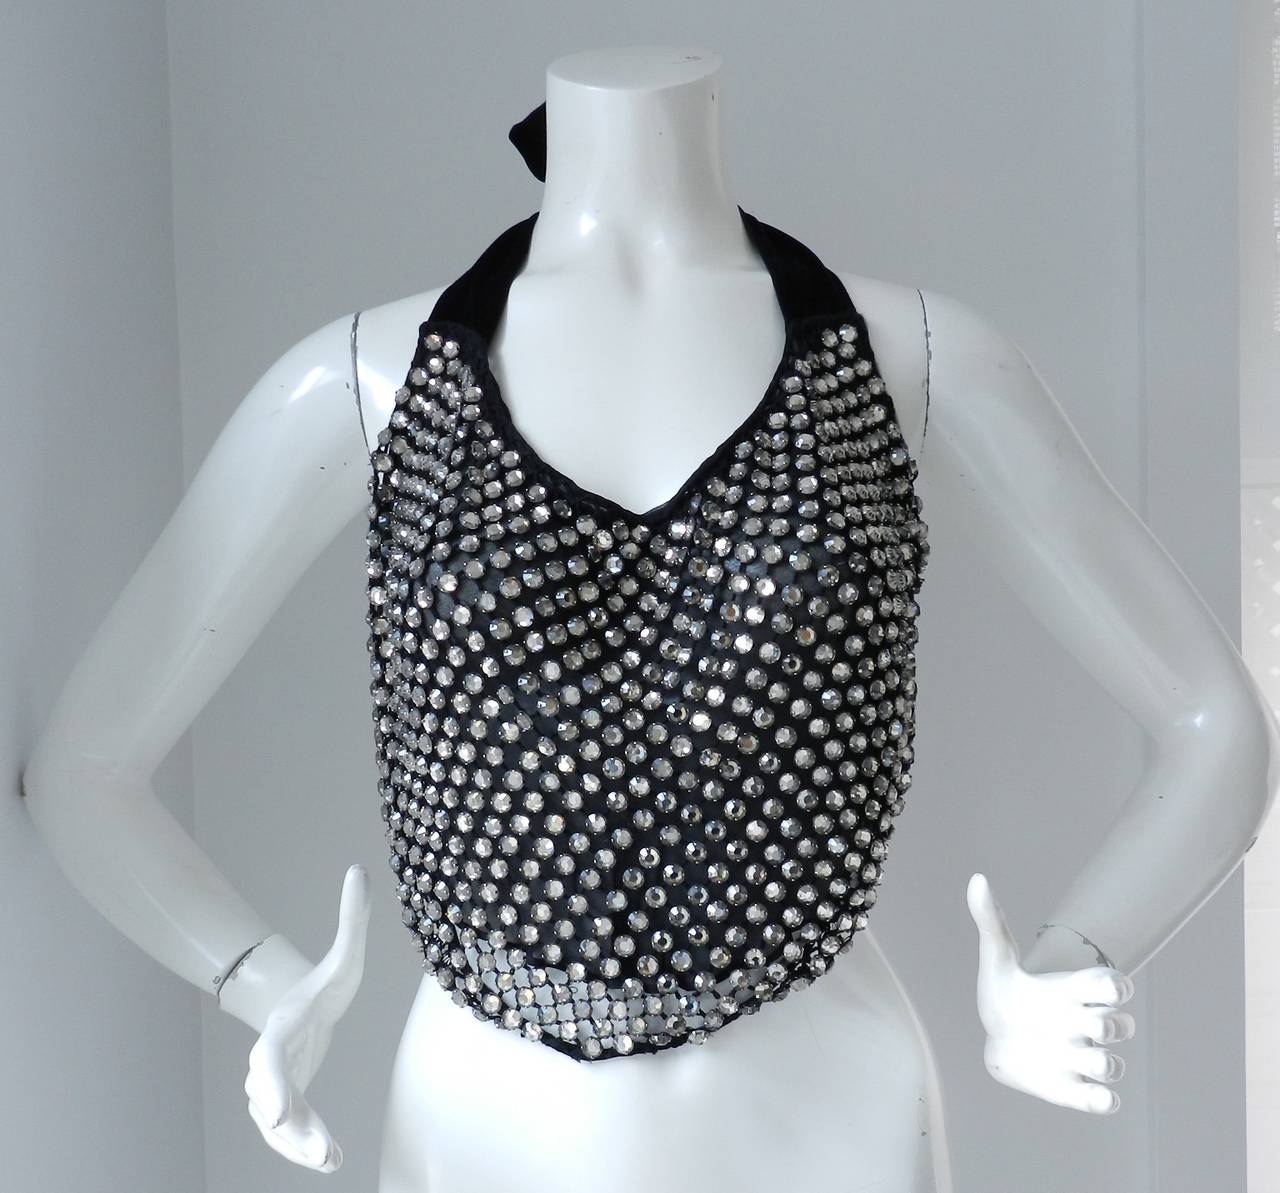 Tom Ford glamorous crystal bib necklace or halter top. Very heavy prong-set Swarovski crytals on black mesh. Ties with velvet ribbon sashes, and lined with sheer silk. Unworn with original price tag of $3990+. Front measures about 11